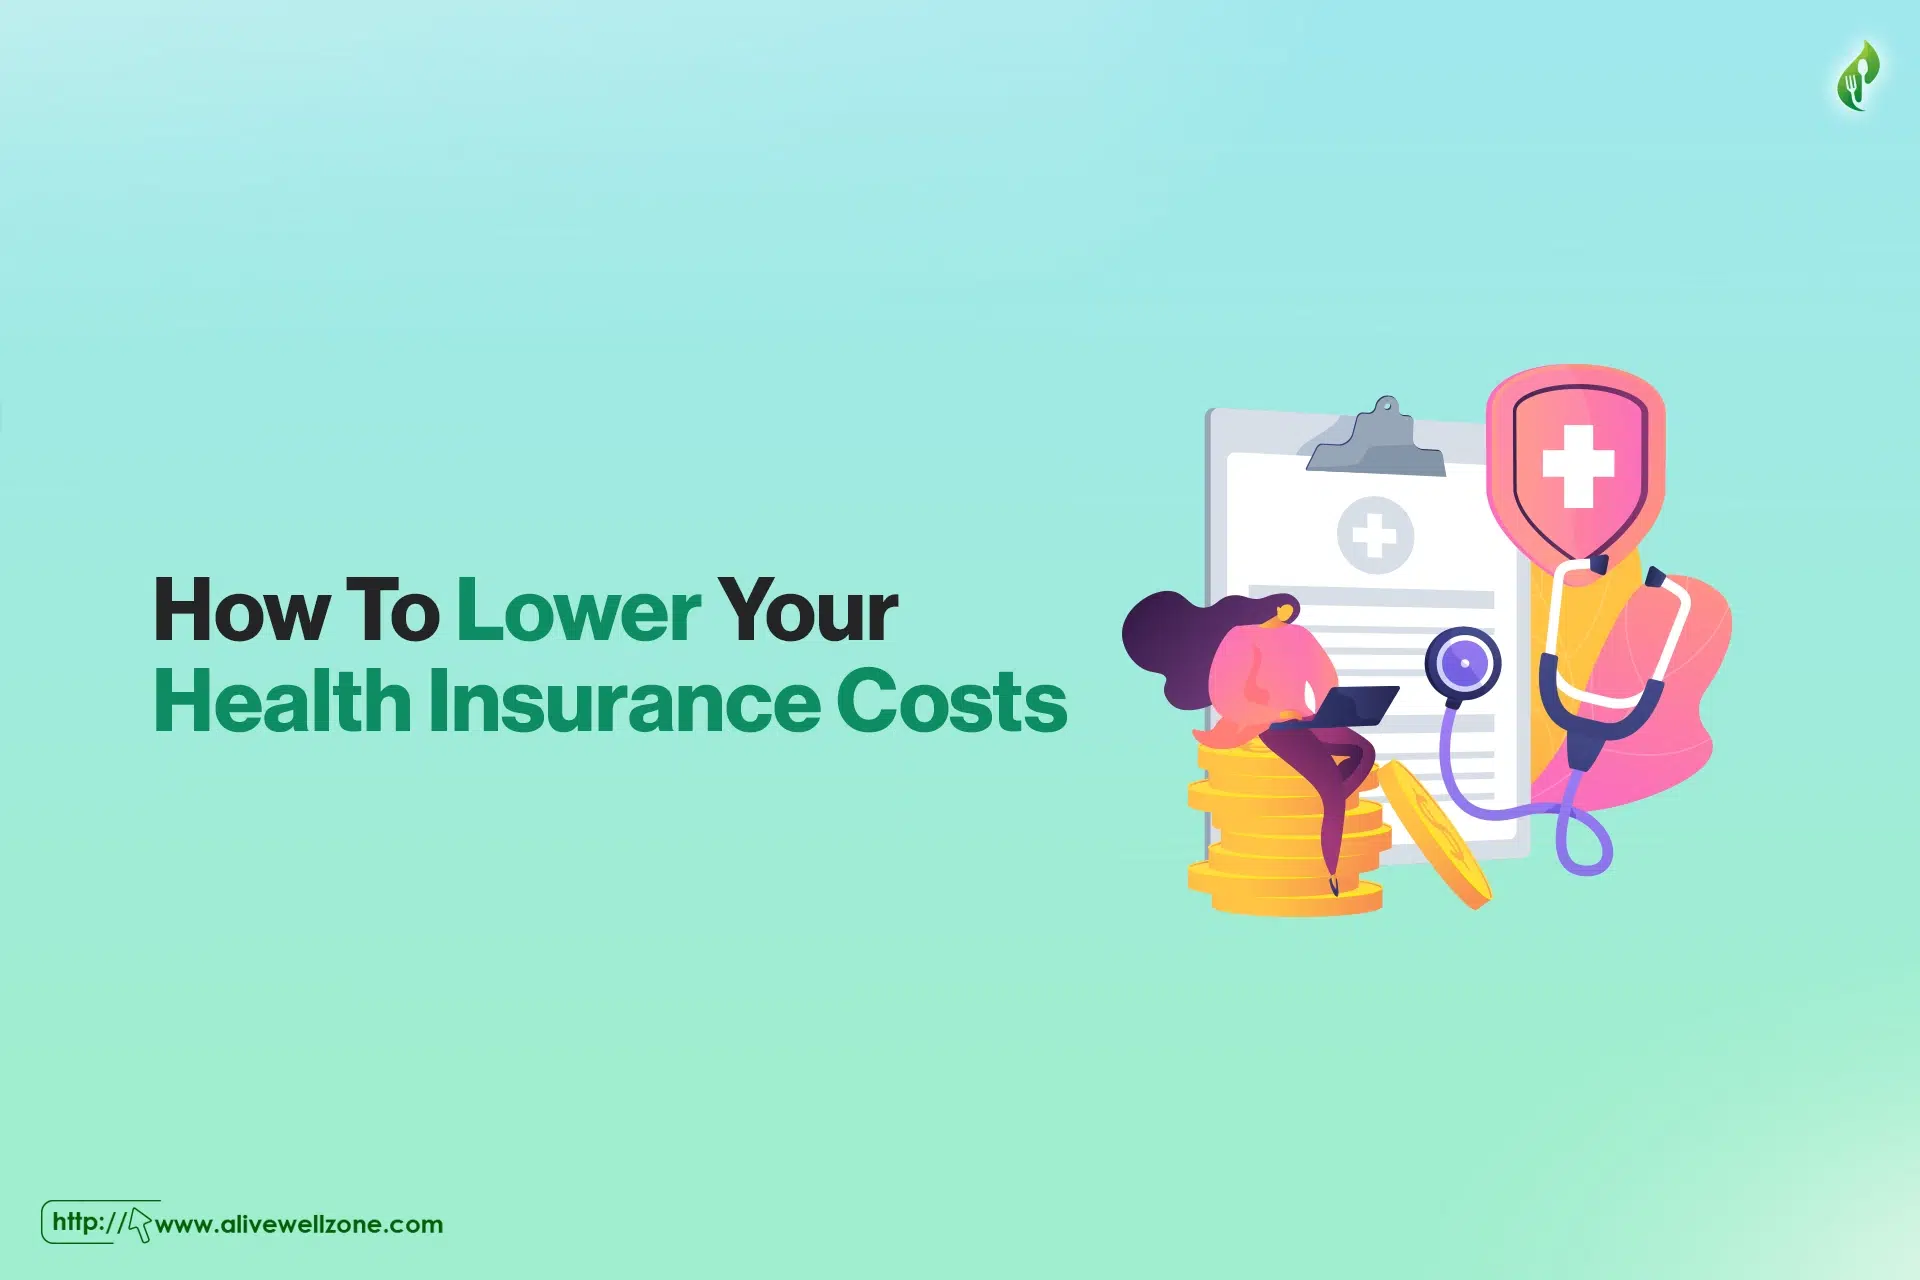 How To Lower Your Health Insurance Costs